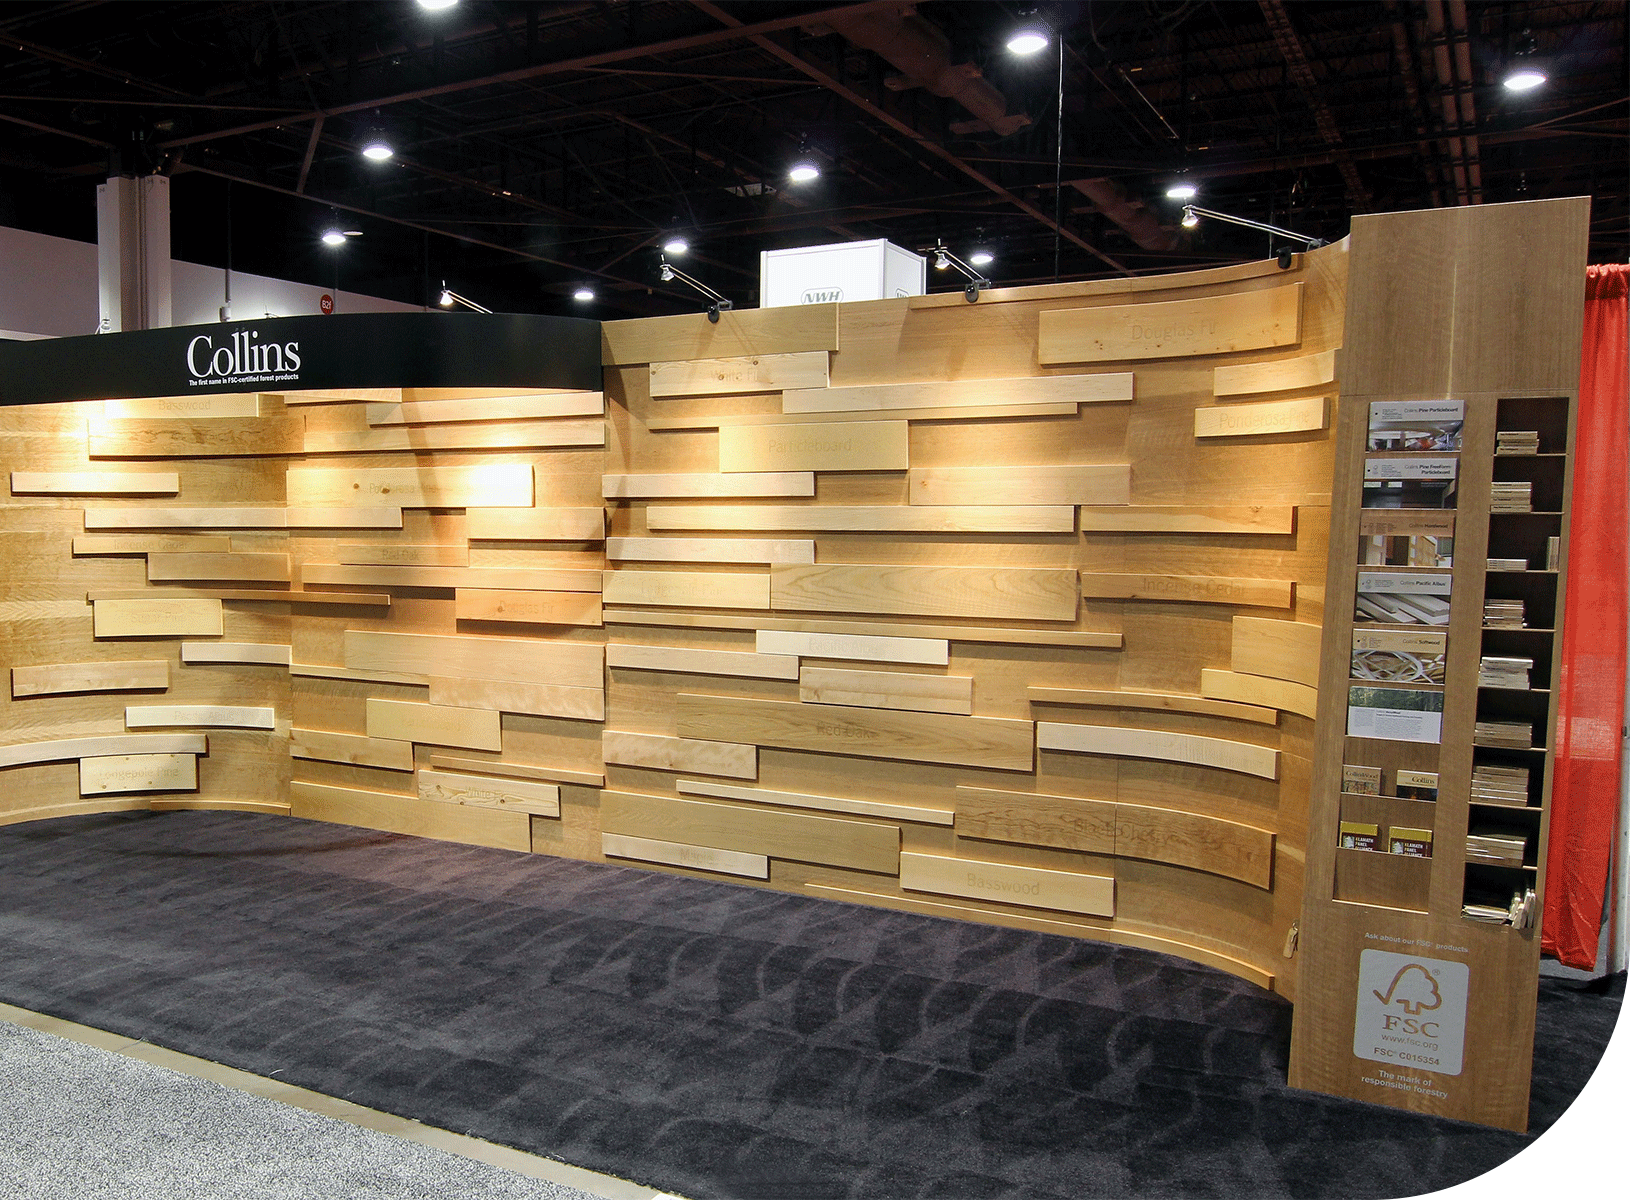 Collins trade show display, manufacturing industry events